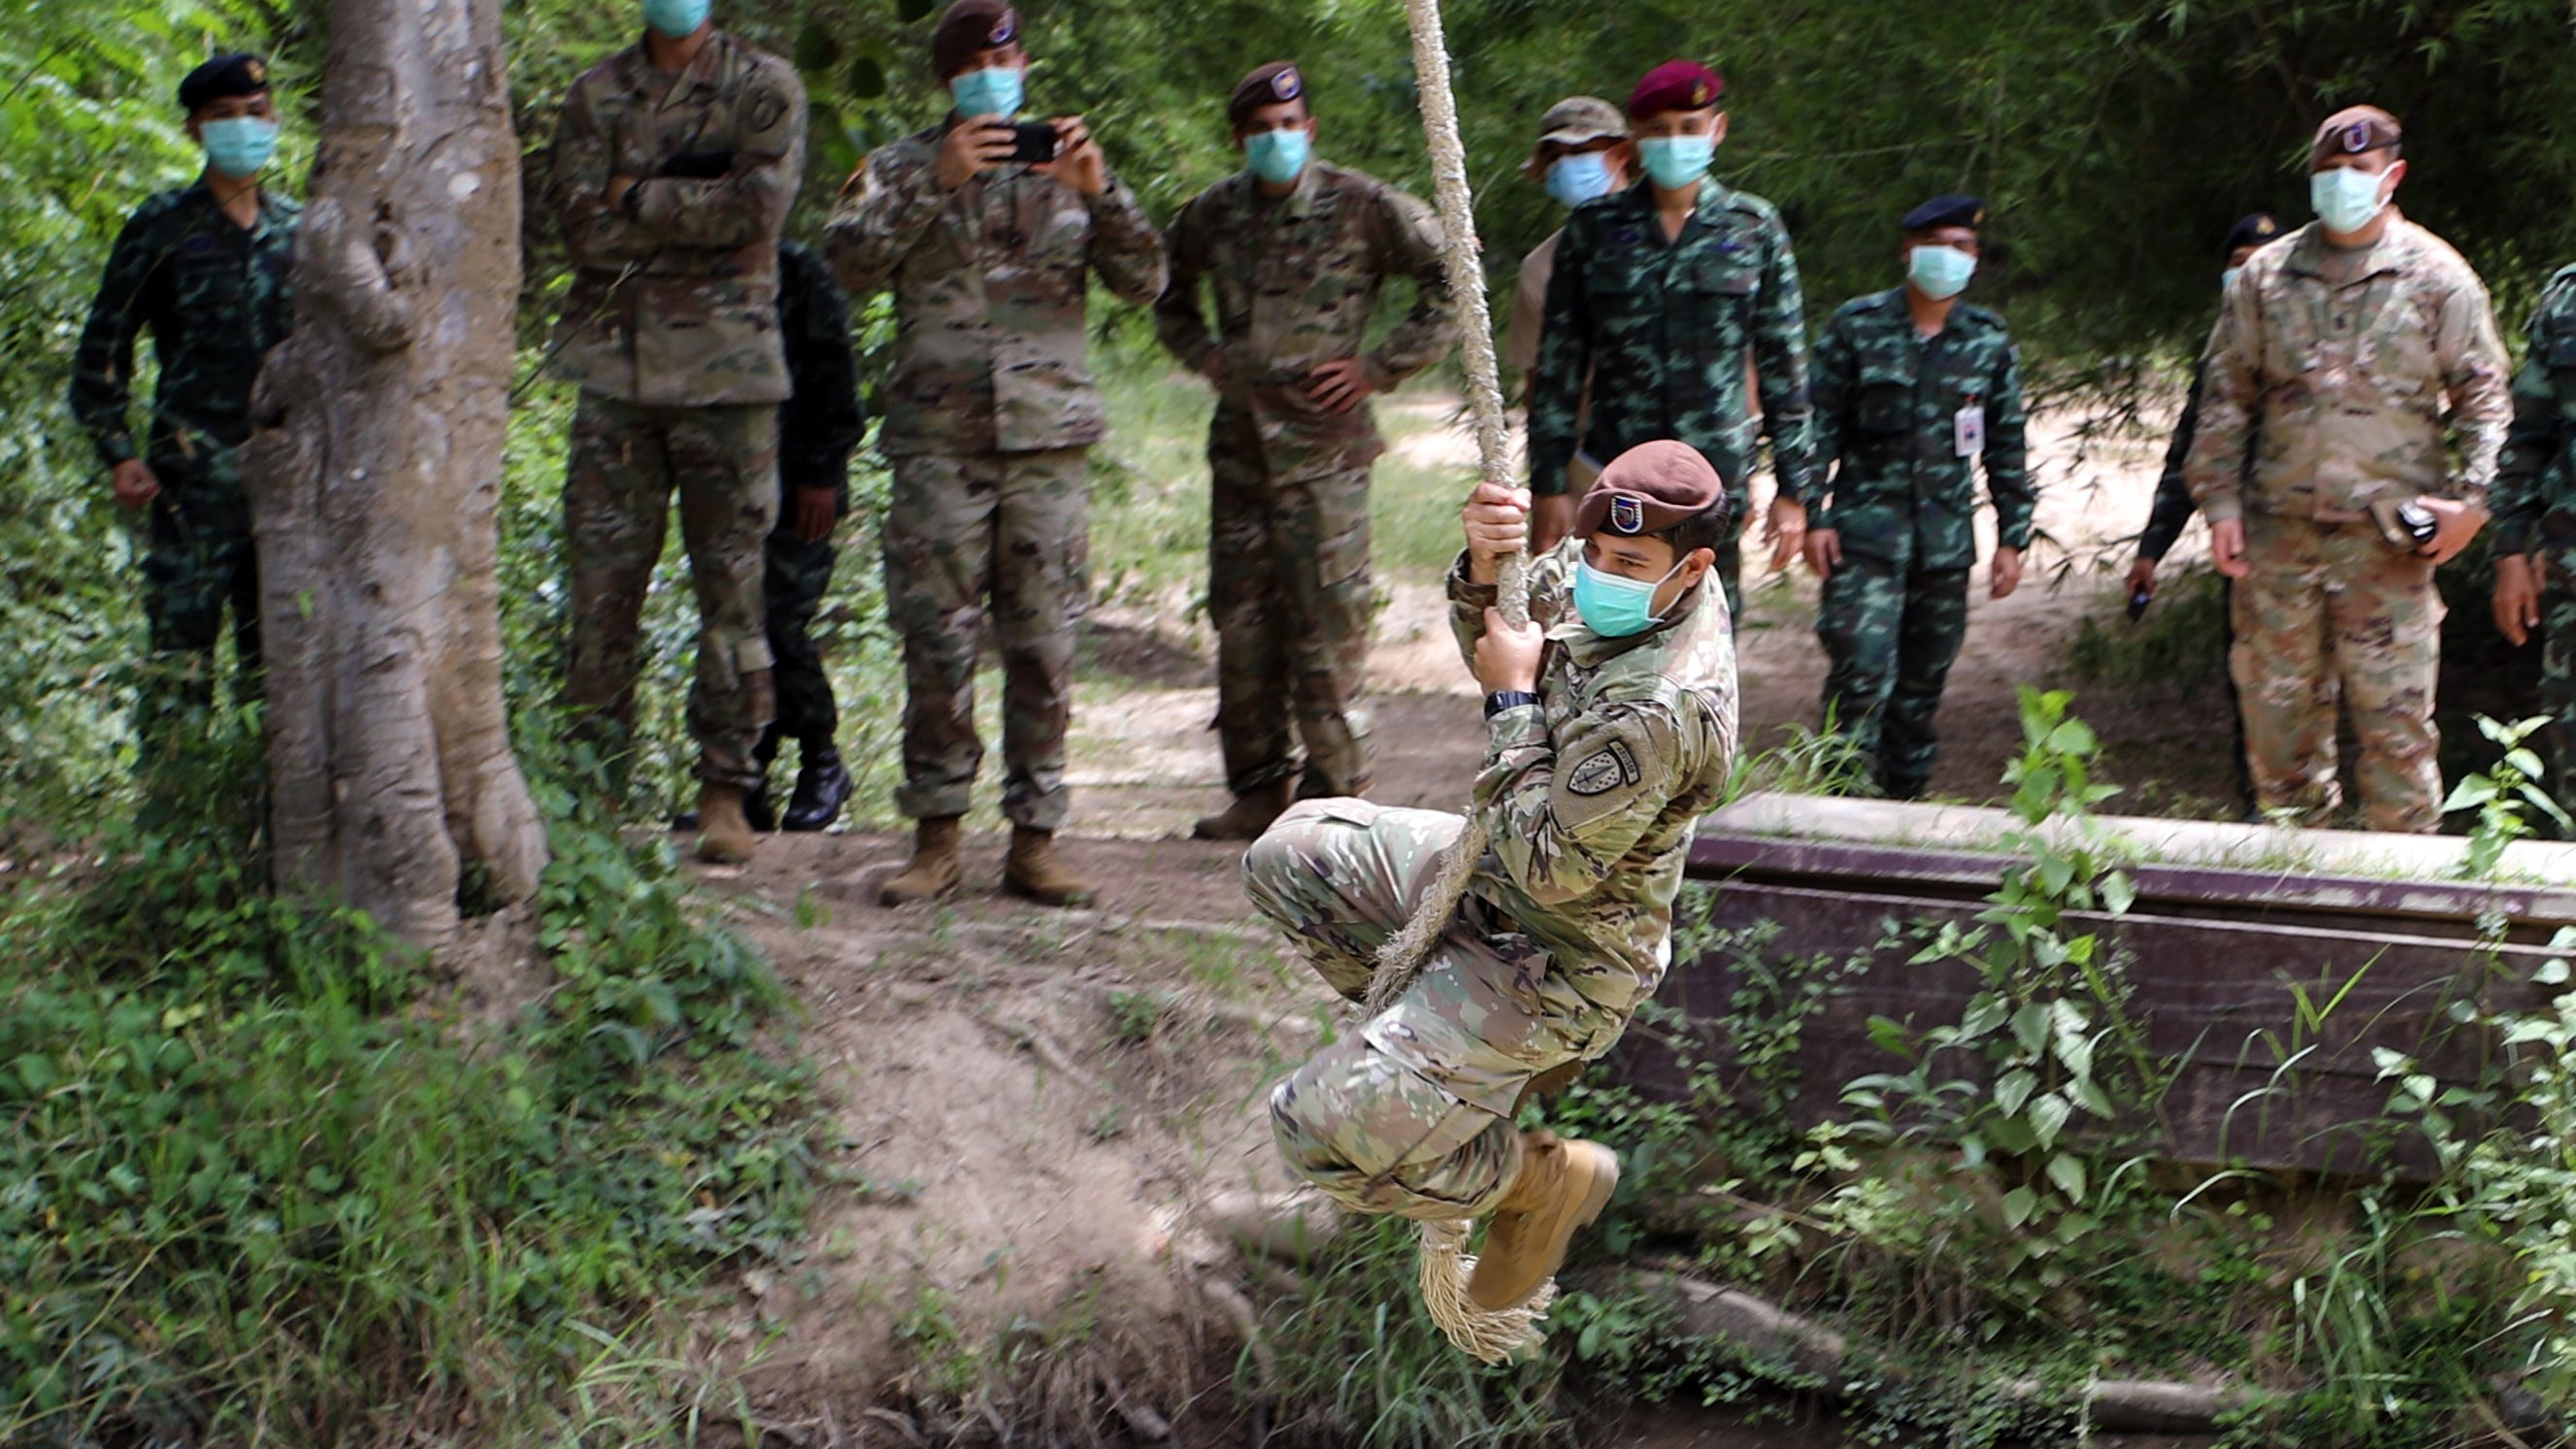 A soldier swinging